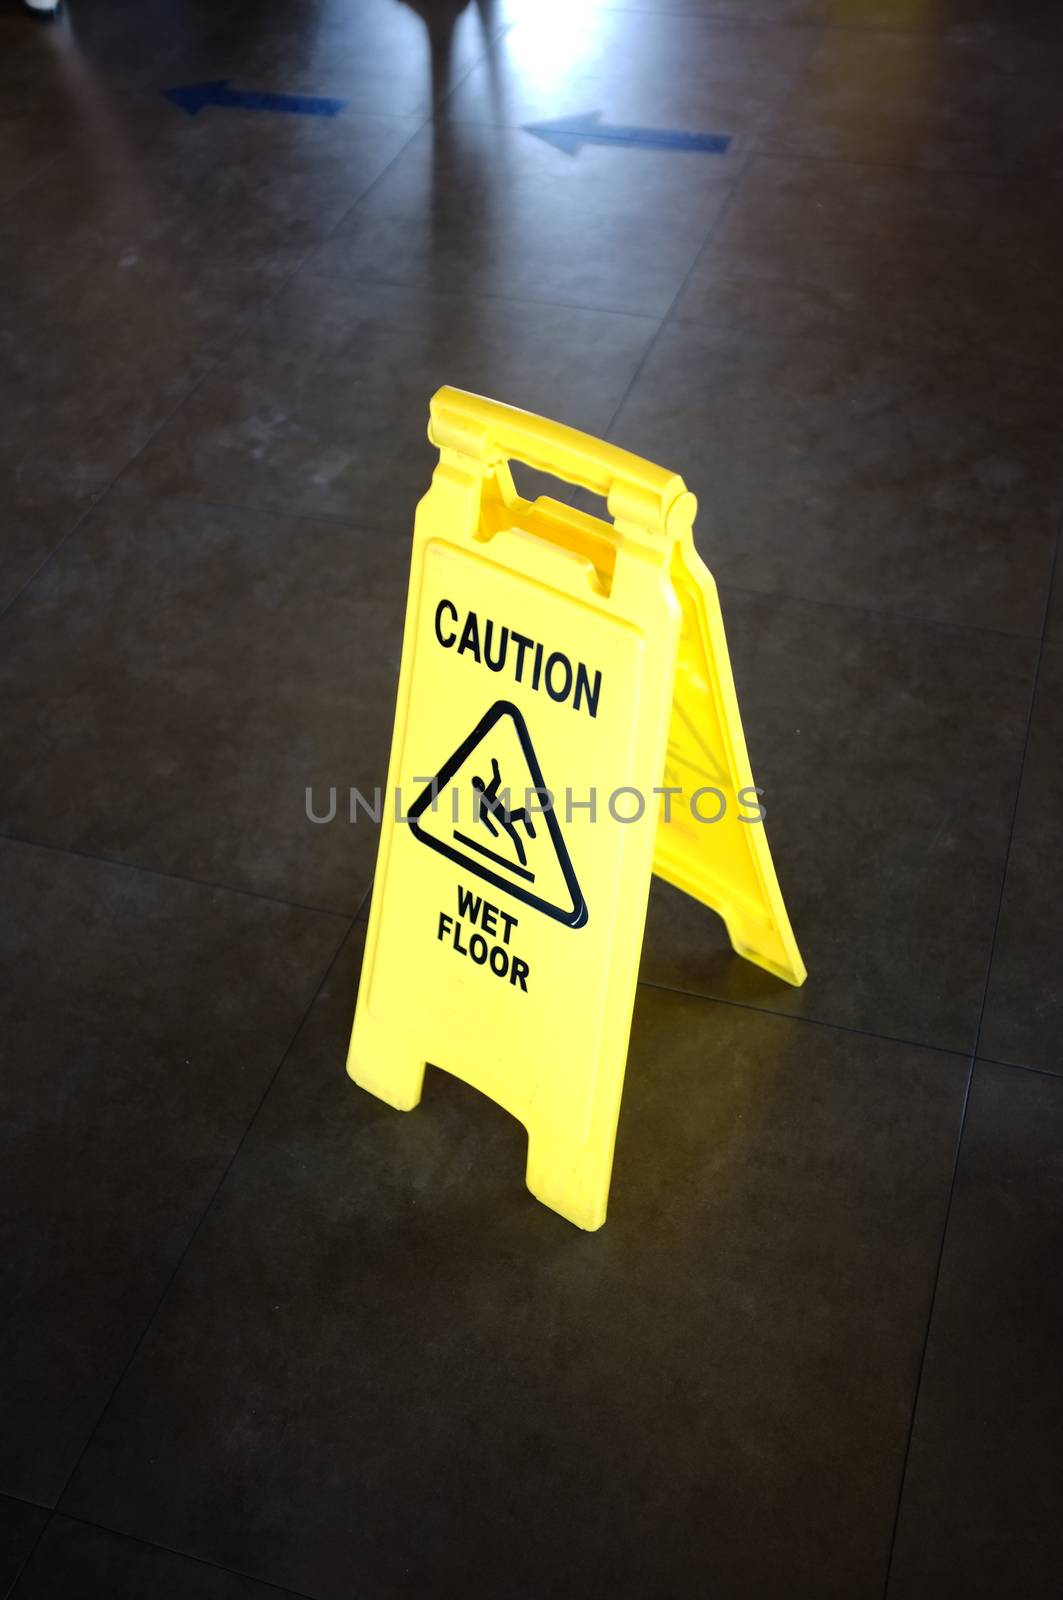 Caution yellow sign for wet floor warning on a floor by Hepjam